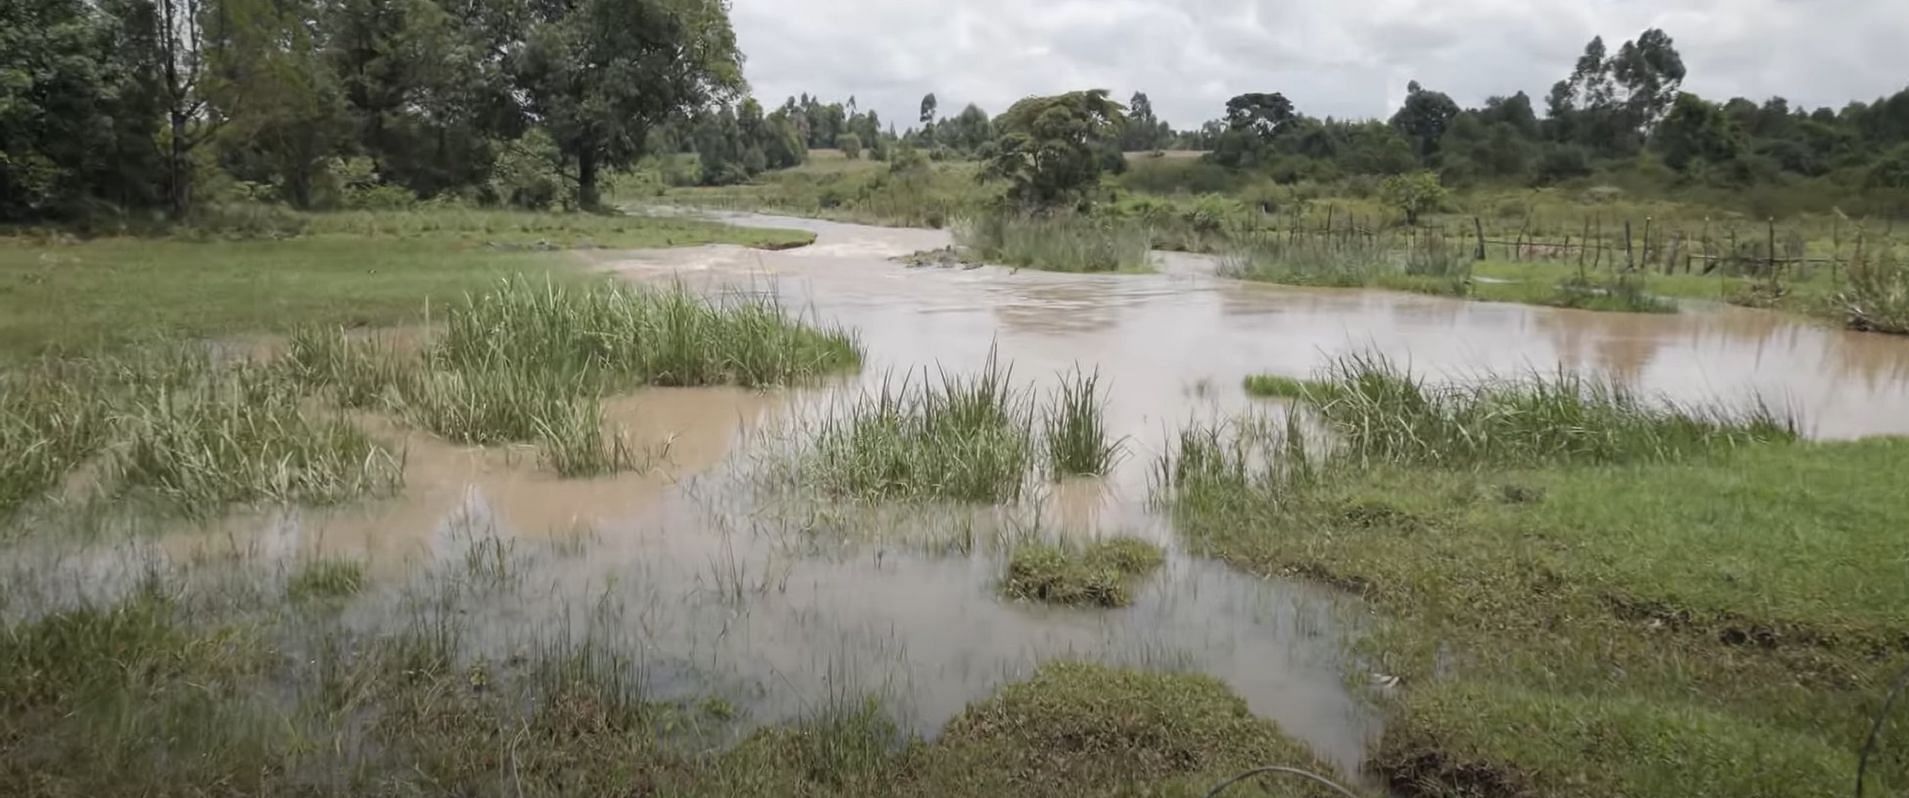 A still from the video showcasing the former source of water for the students in Nairiri village (Image via YouTube)